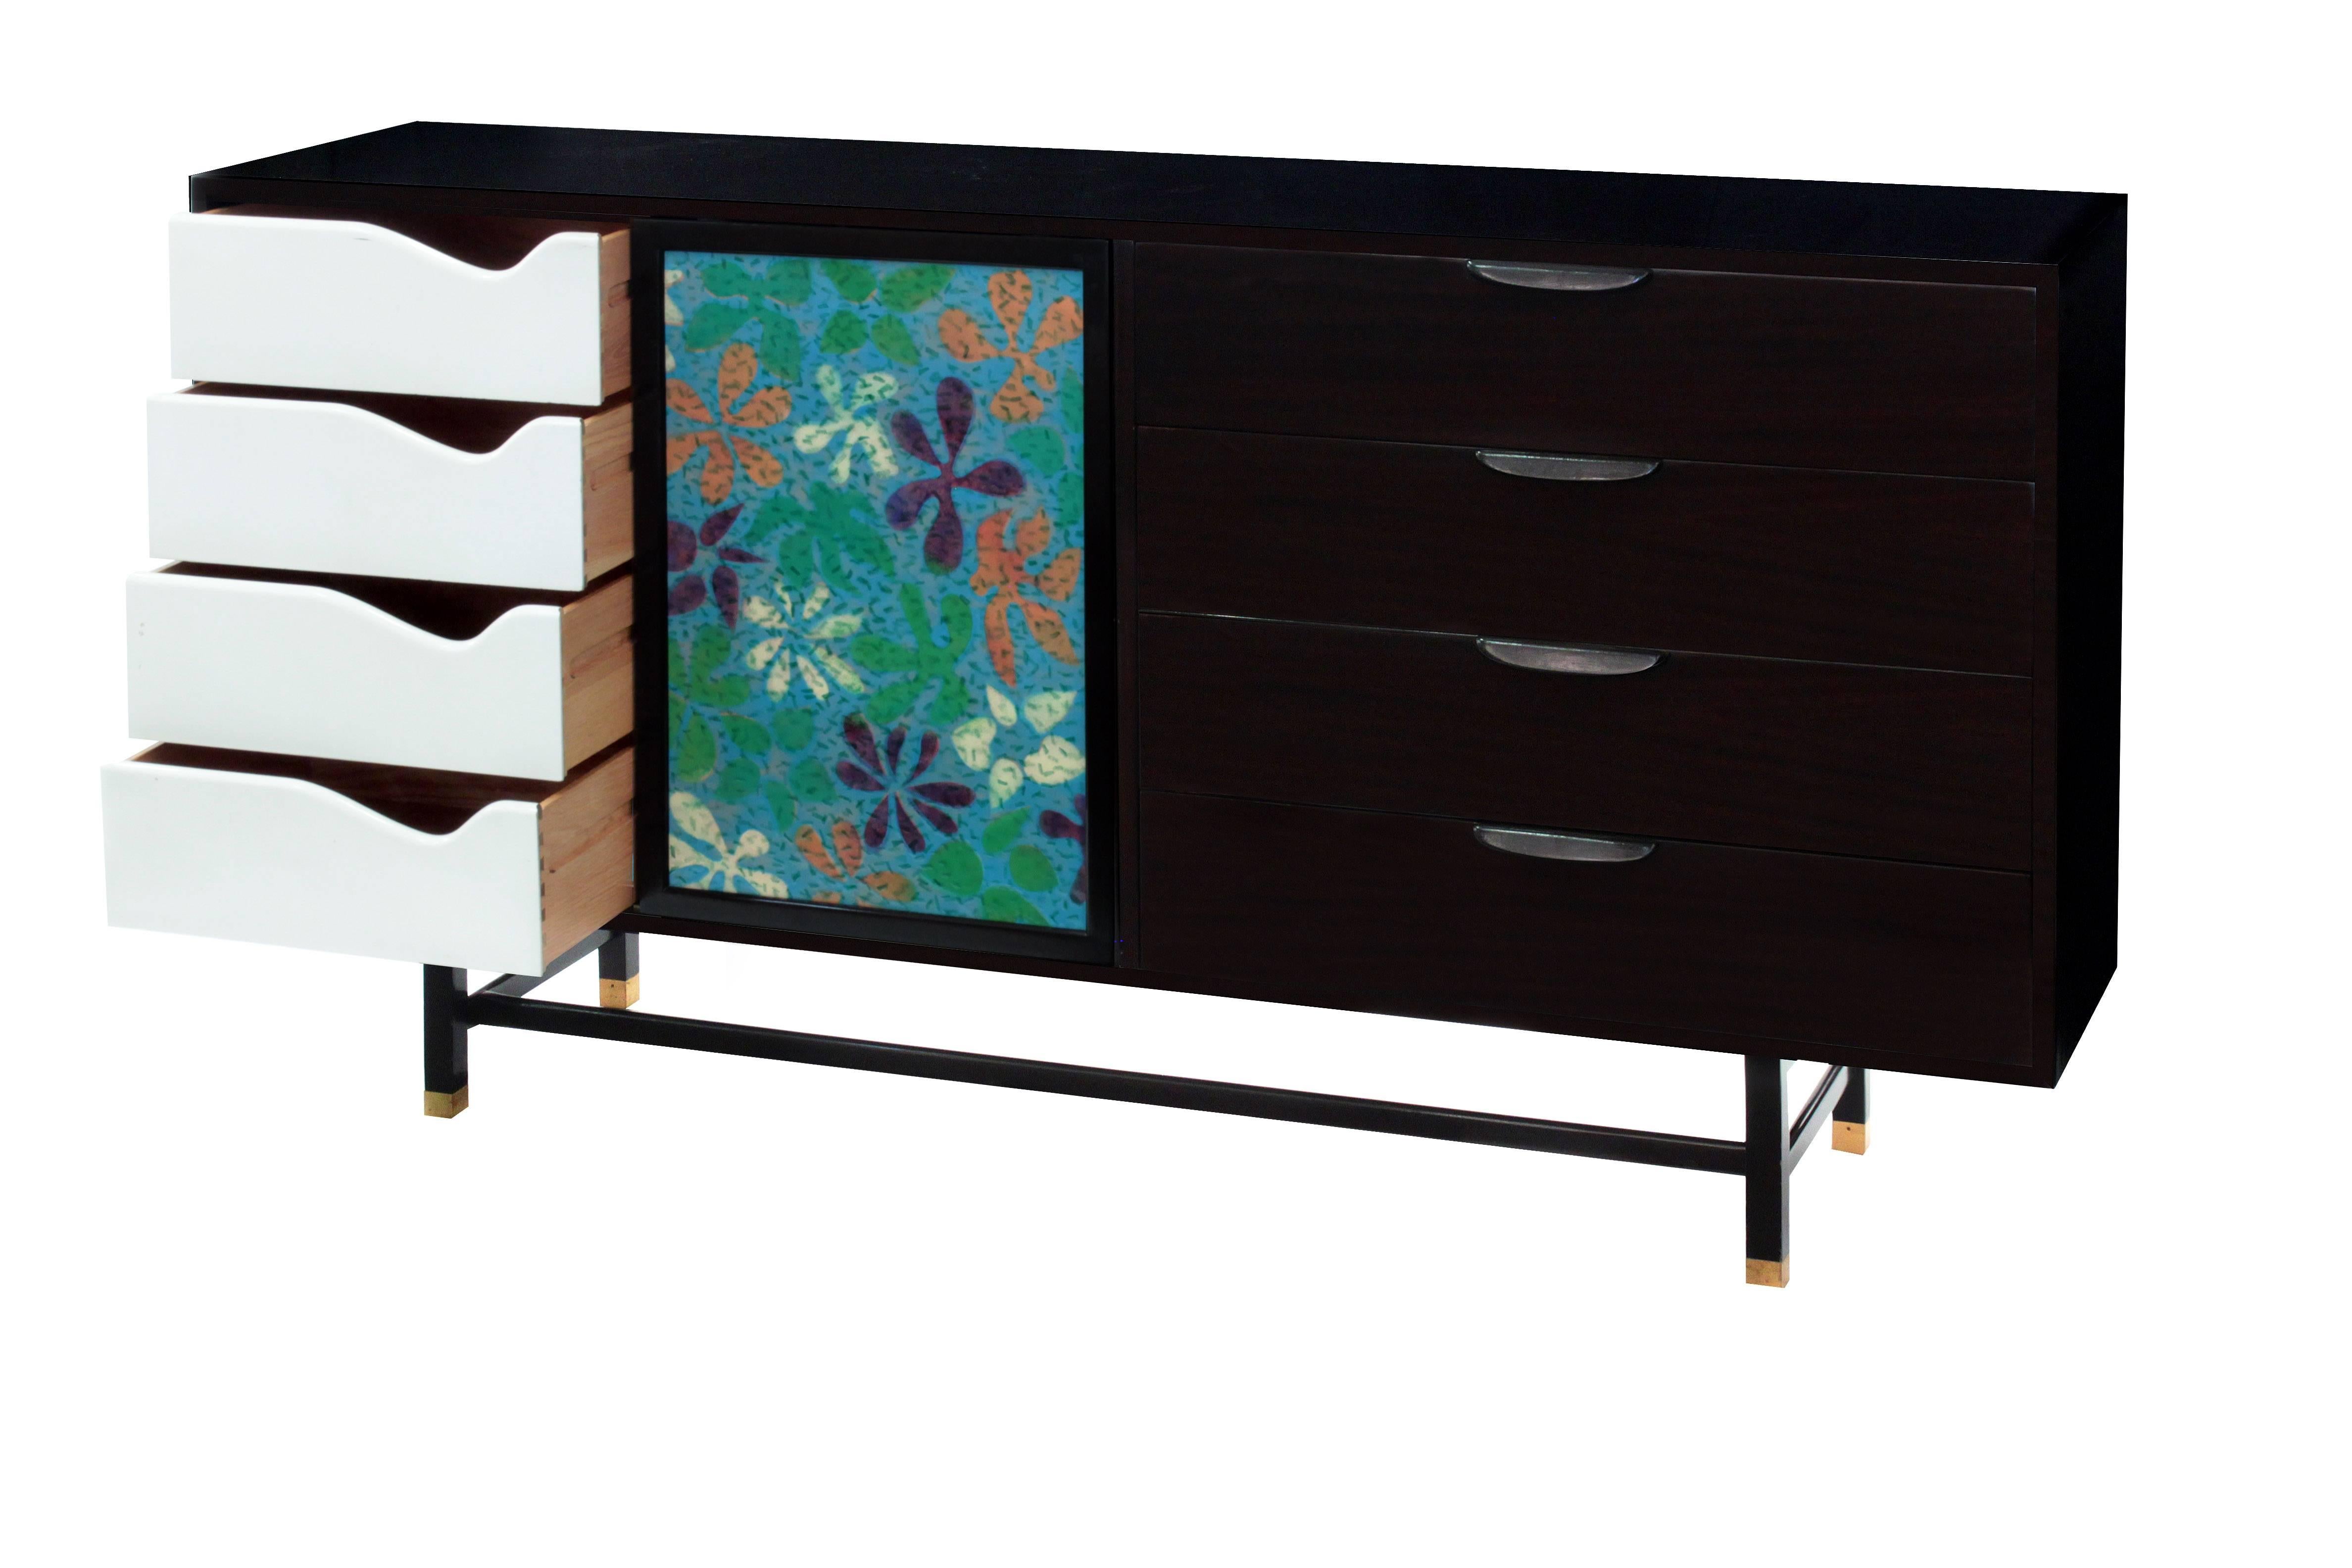 Cabinet No.1079 in mahogany with 2 doors inset with jewelry enamel on copper graphic flower design and rosewood pulls by Harvey Probber, American 1950s (signed inside drawer). Harvey Probber's name is synonymous with exceptional craftsmanship.